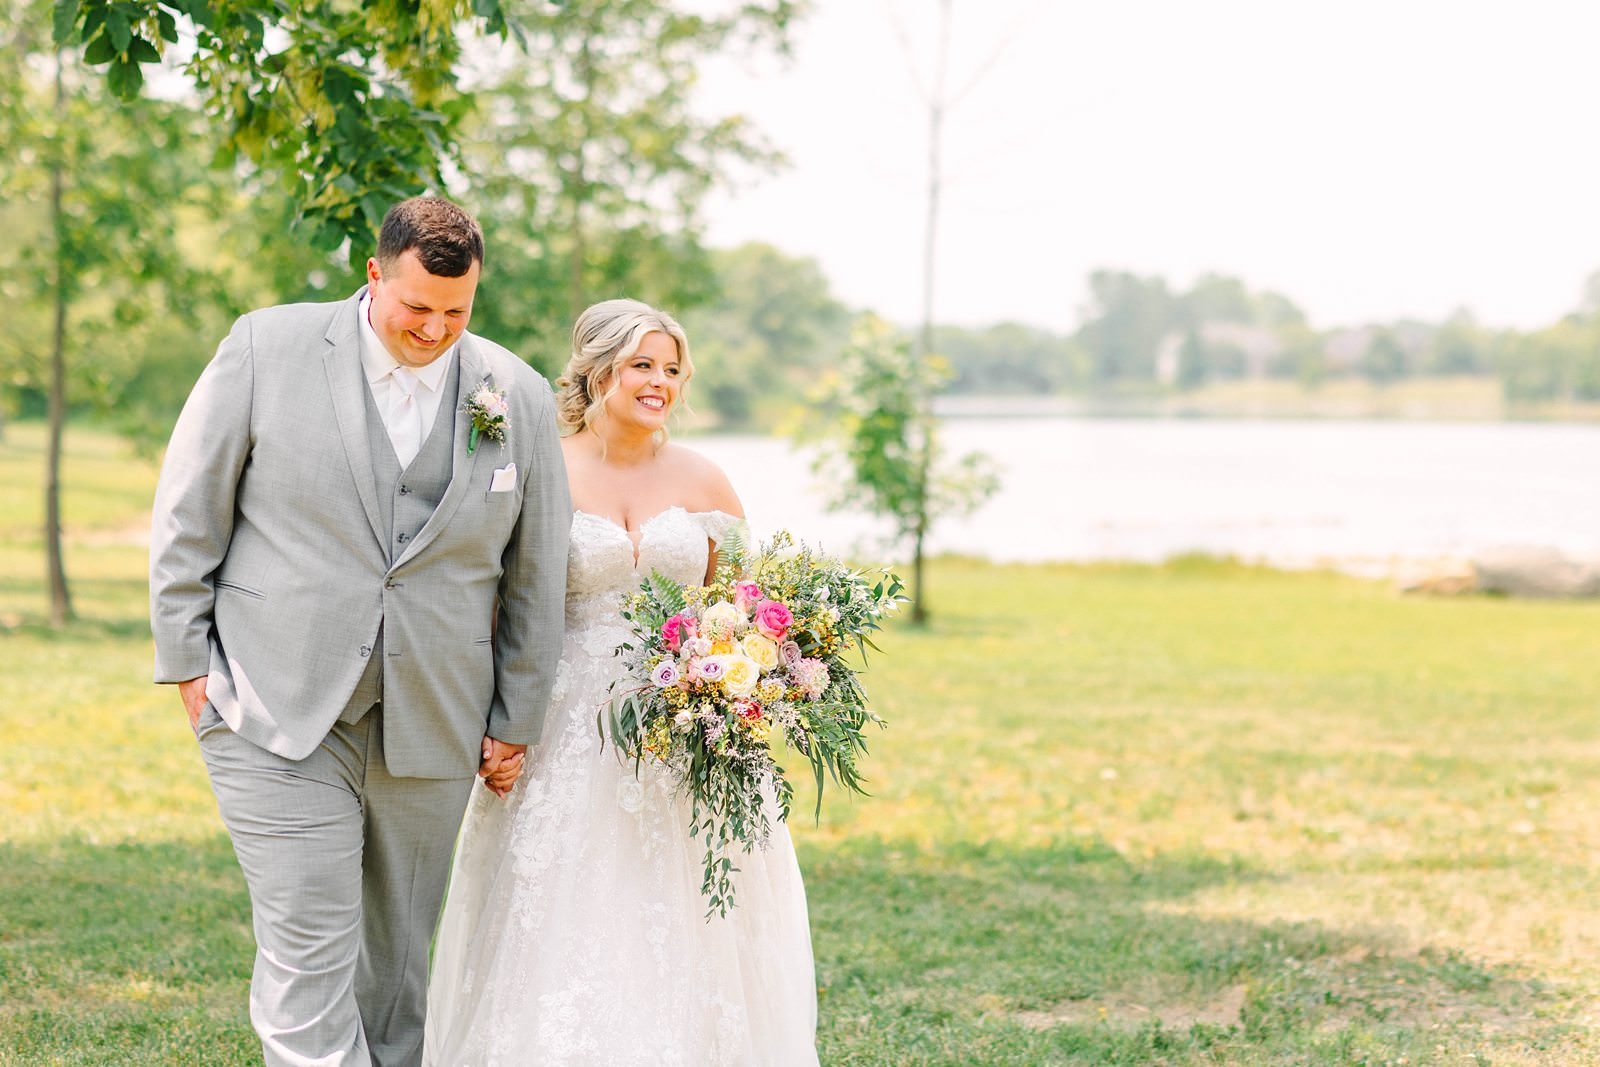 A Sunny Summer Wedding at Friedman Park in Newburgh Indiana | Paige and Dylan | Bret and Brandie Photography083.jpg